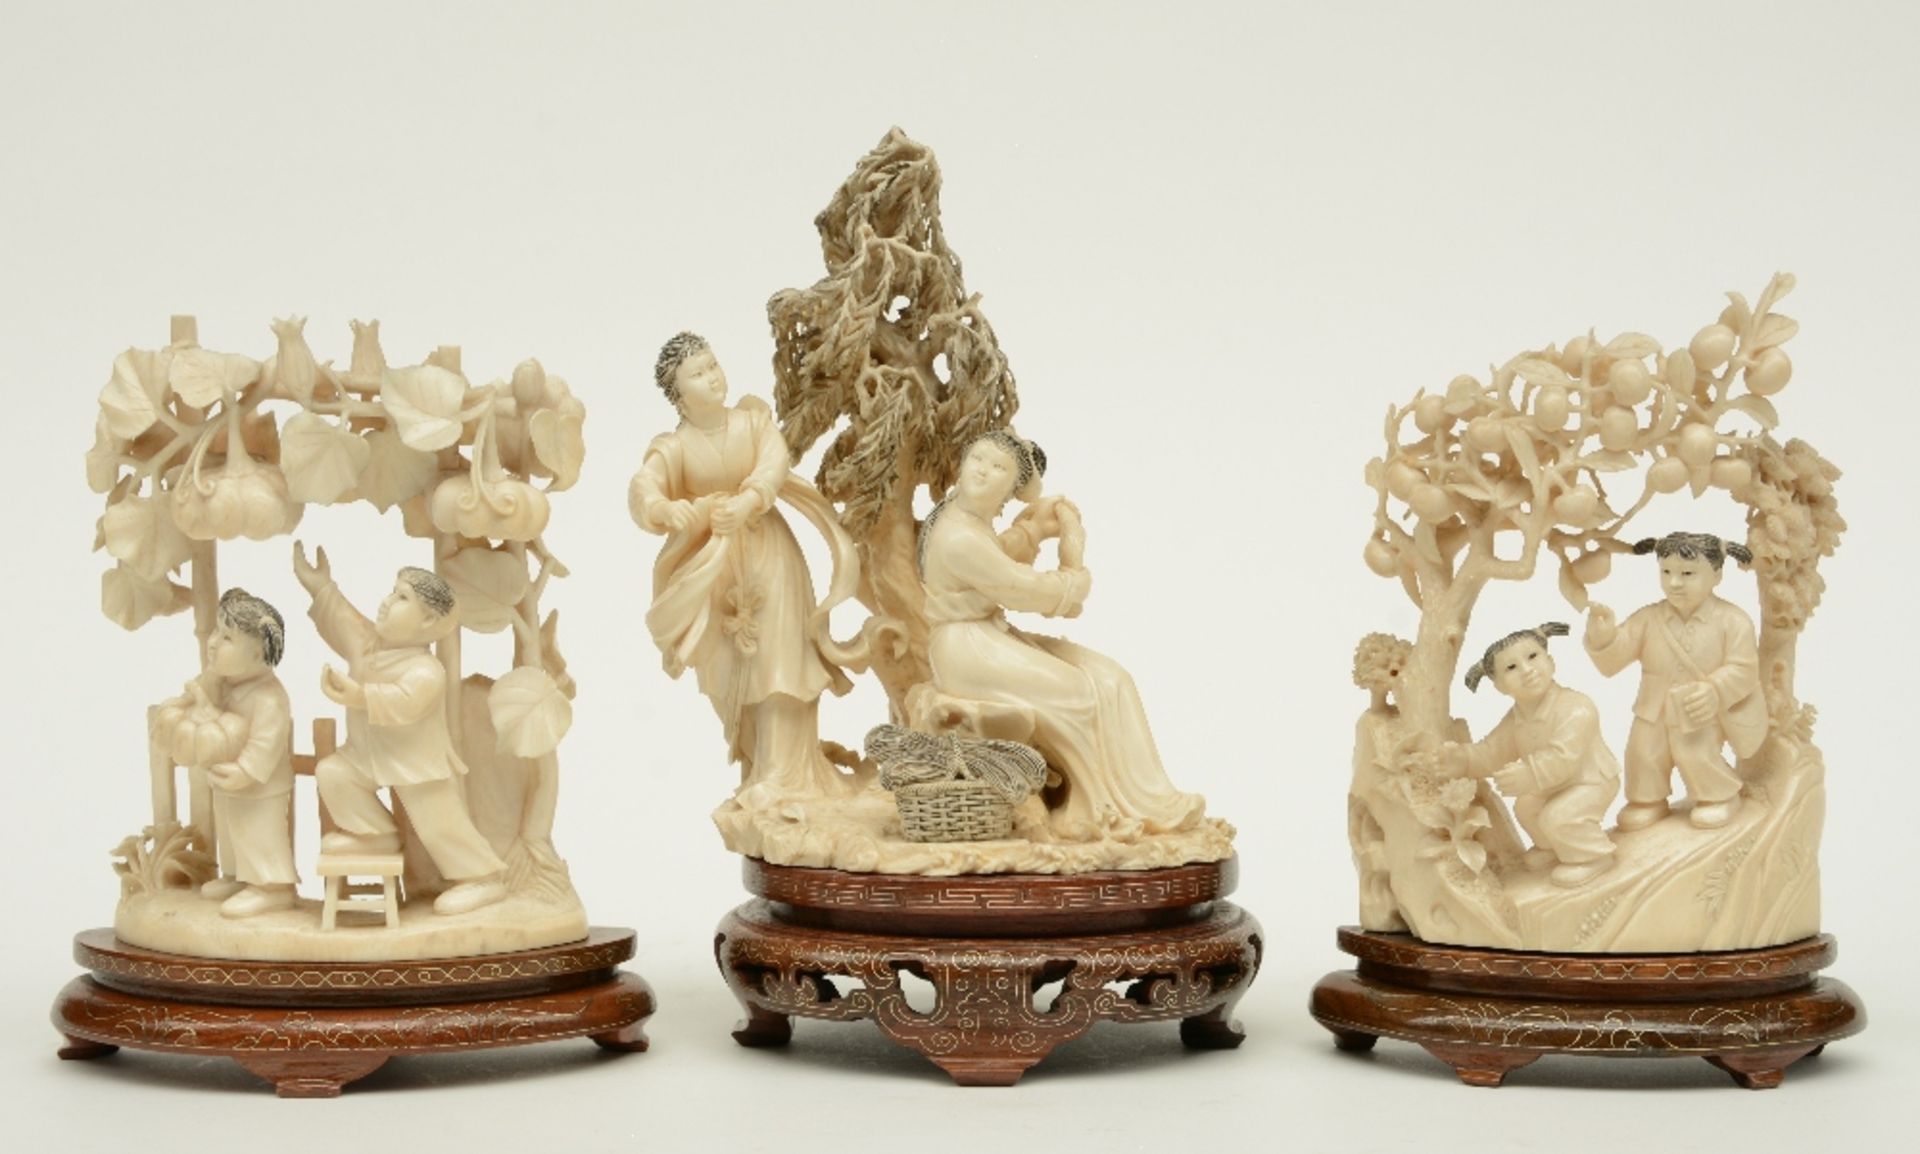 A Chinese ivory sculpture figuring two maiden, scrimshaw decorated, on a wooden base, first half